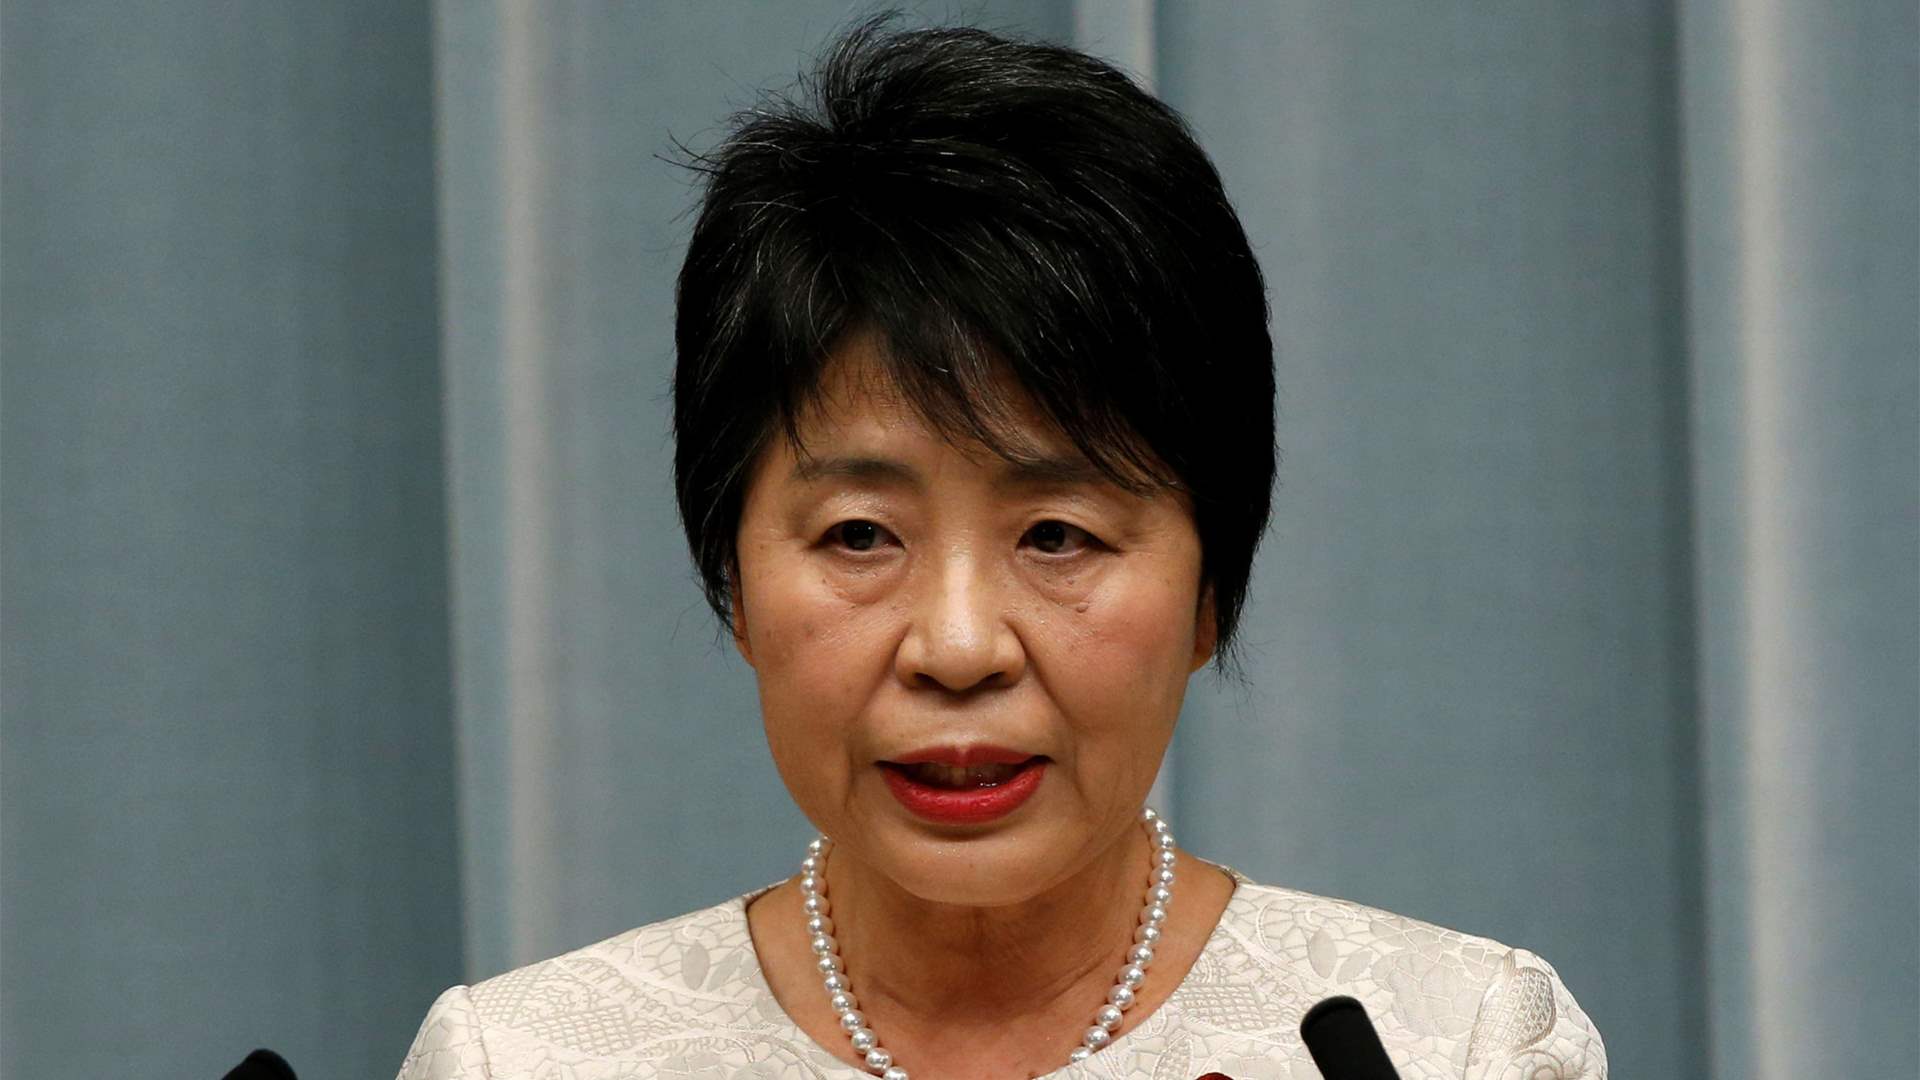 Japan urges Iran to exercise restraint after attack on Israel